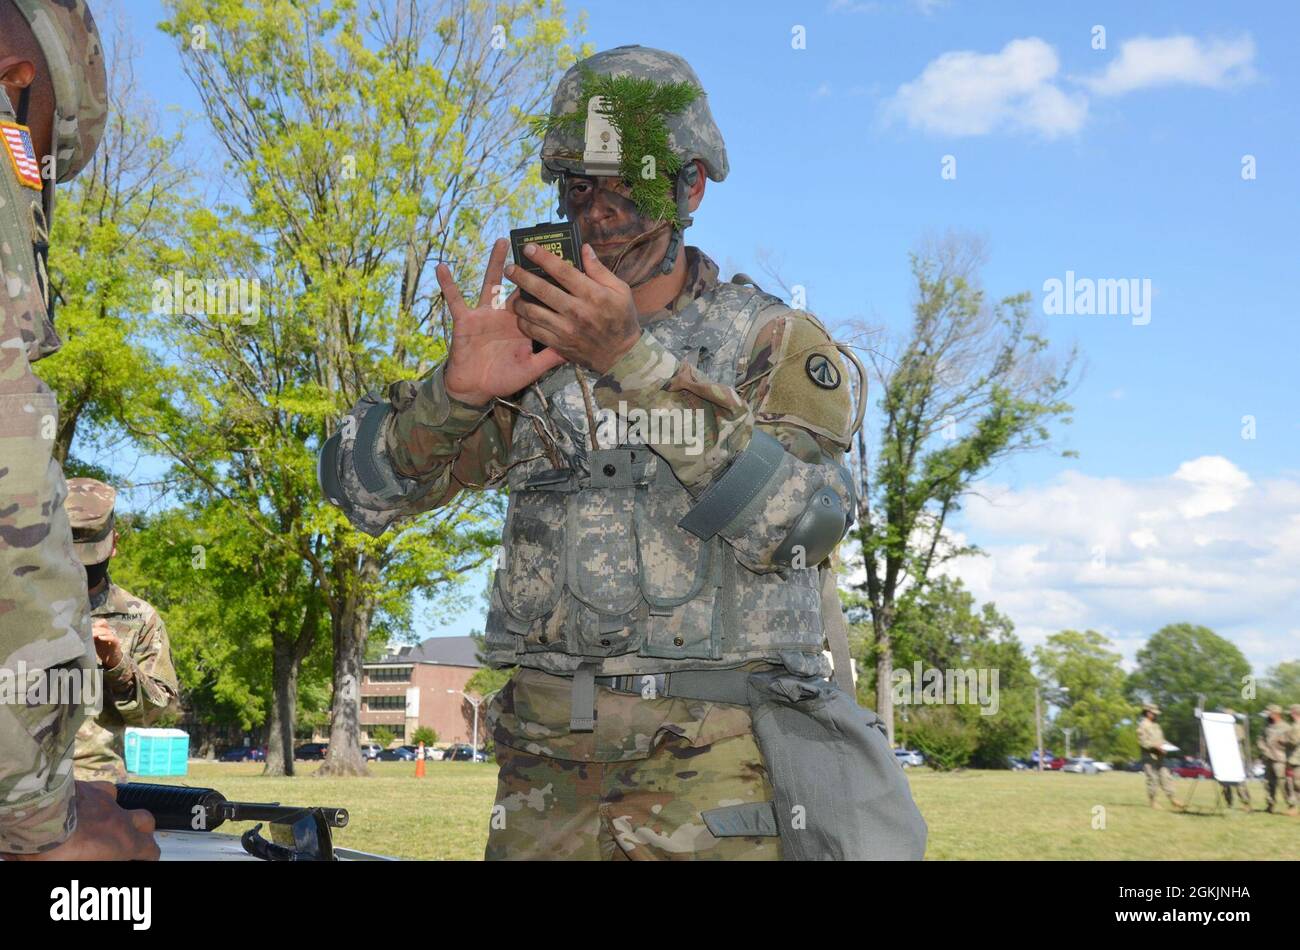 Pfc. Victor Vasquez, a cargo specialist from Juarez, Mexico, 689th Rapid Port Opening Element, 832nd Transportation Bn., 597th Transportation Bde. applies camouflage at Joint Base Langley-Eustis, Va. May 5, 2021.    Vasquez was representing the 597th Transportation Bde. during the 2021 Military Surface Deployment and Distribution Command Best Warrior Competition. Stock Photo